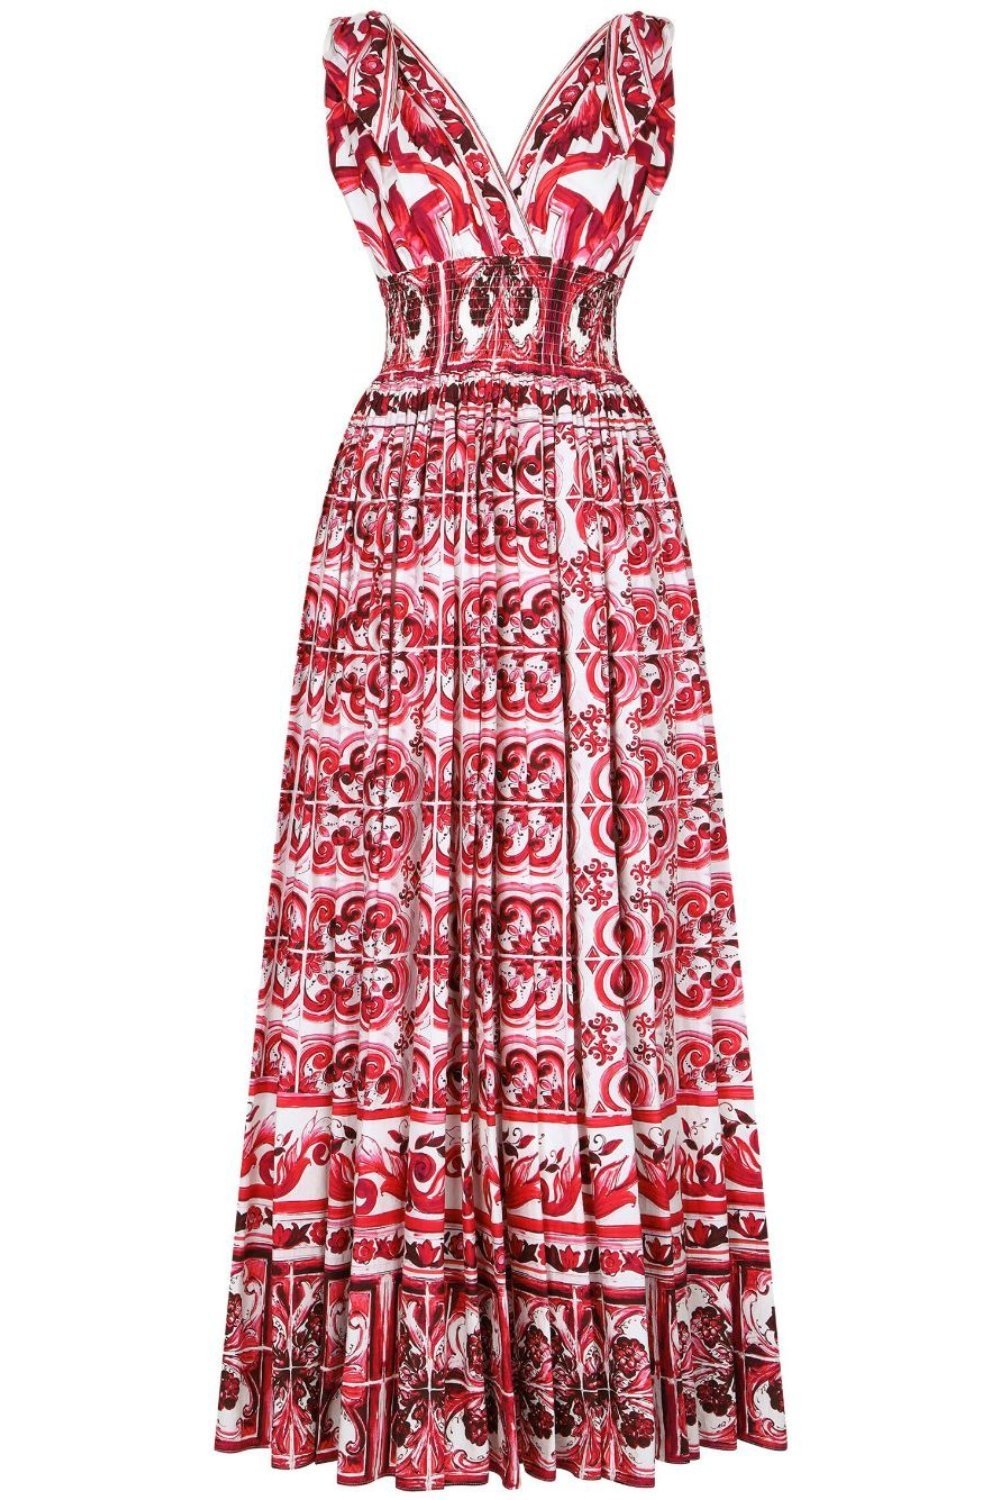 dresses-Sibyl Printed Knotted Strap Maxi Dress-SD0020627643-Red-S - Sunfere